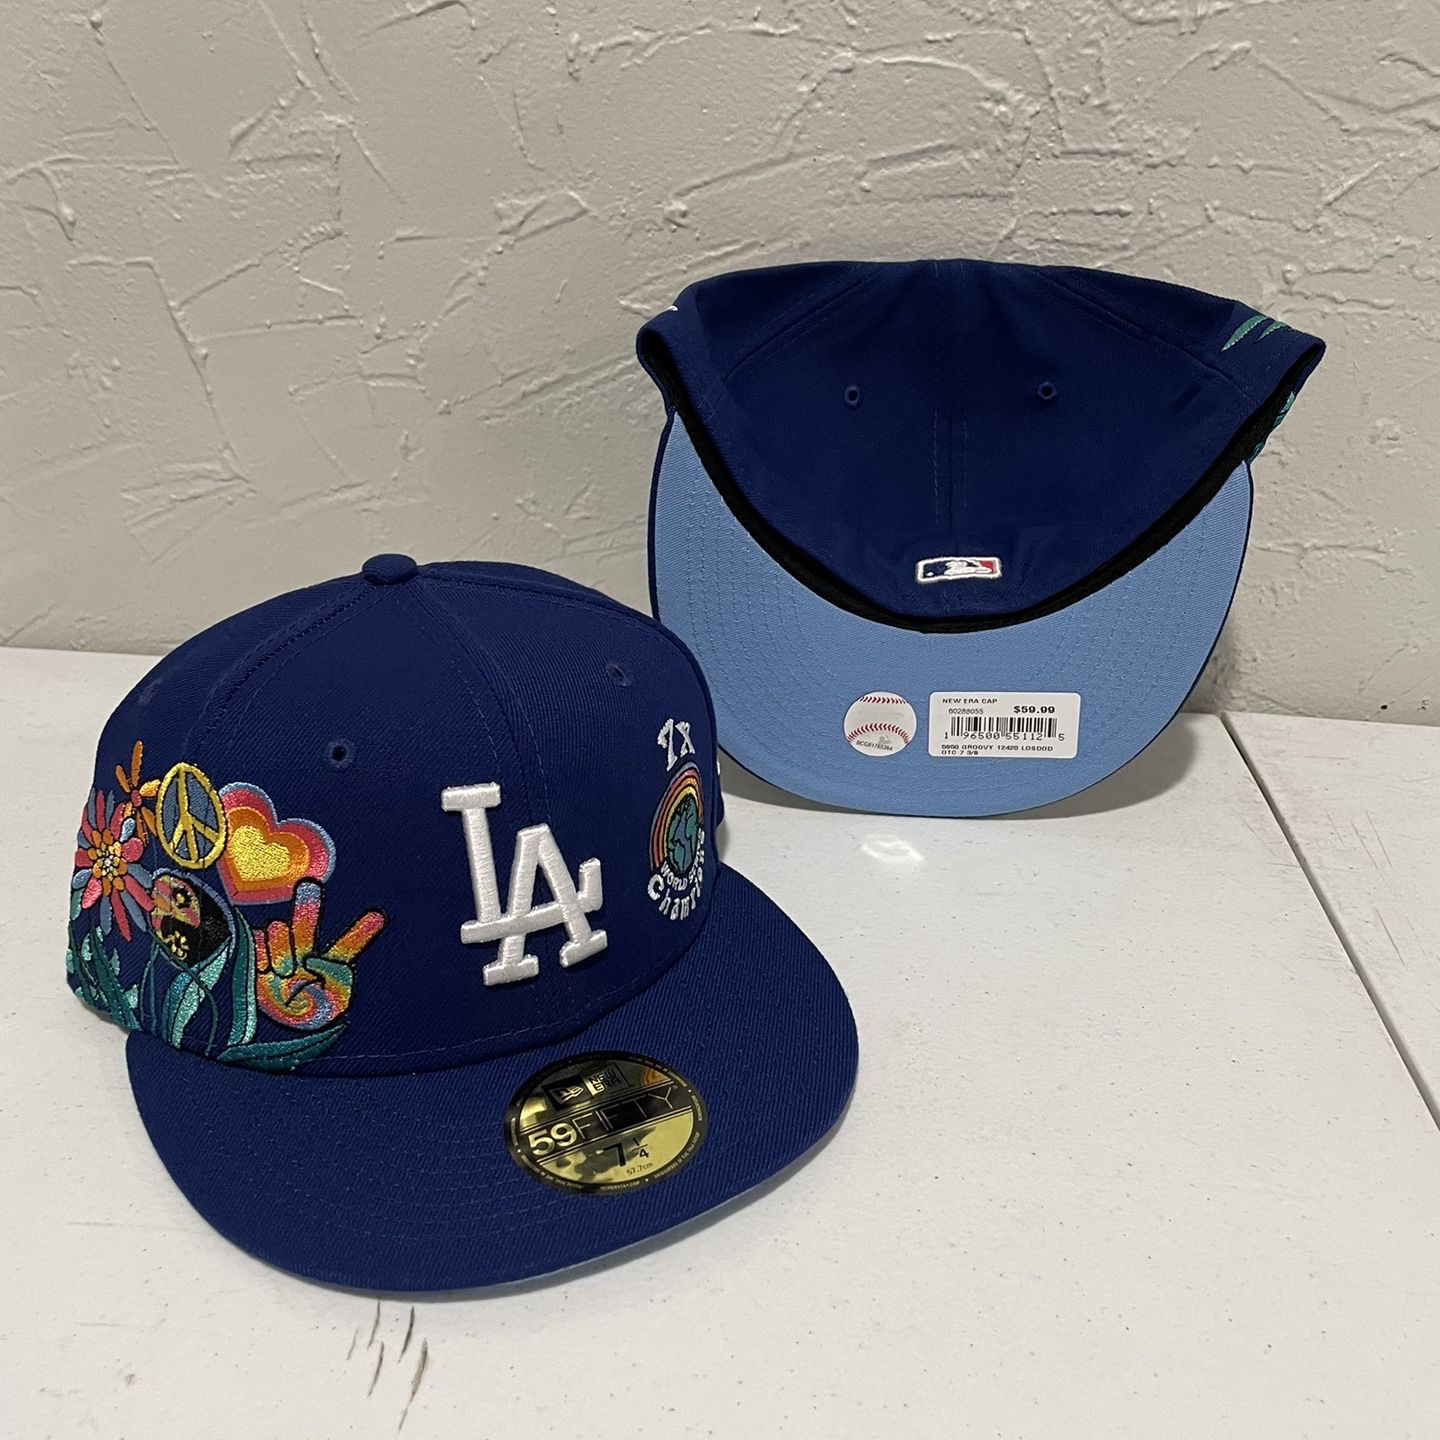 7 3/8 Mexico WBC Blue/Pink Alternate Jersey Hat for Sale in Boring, OR -  OfferUp